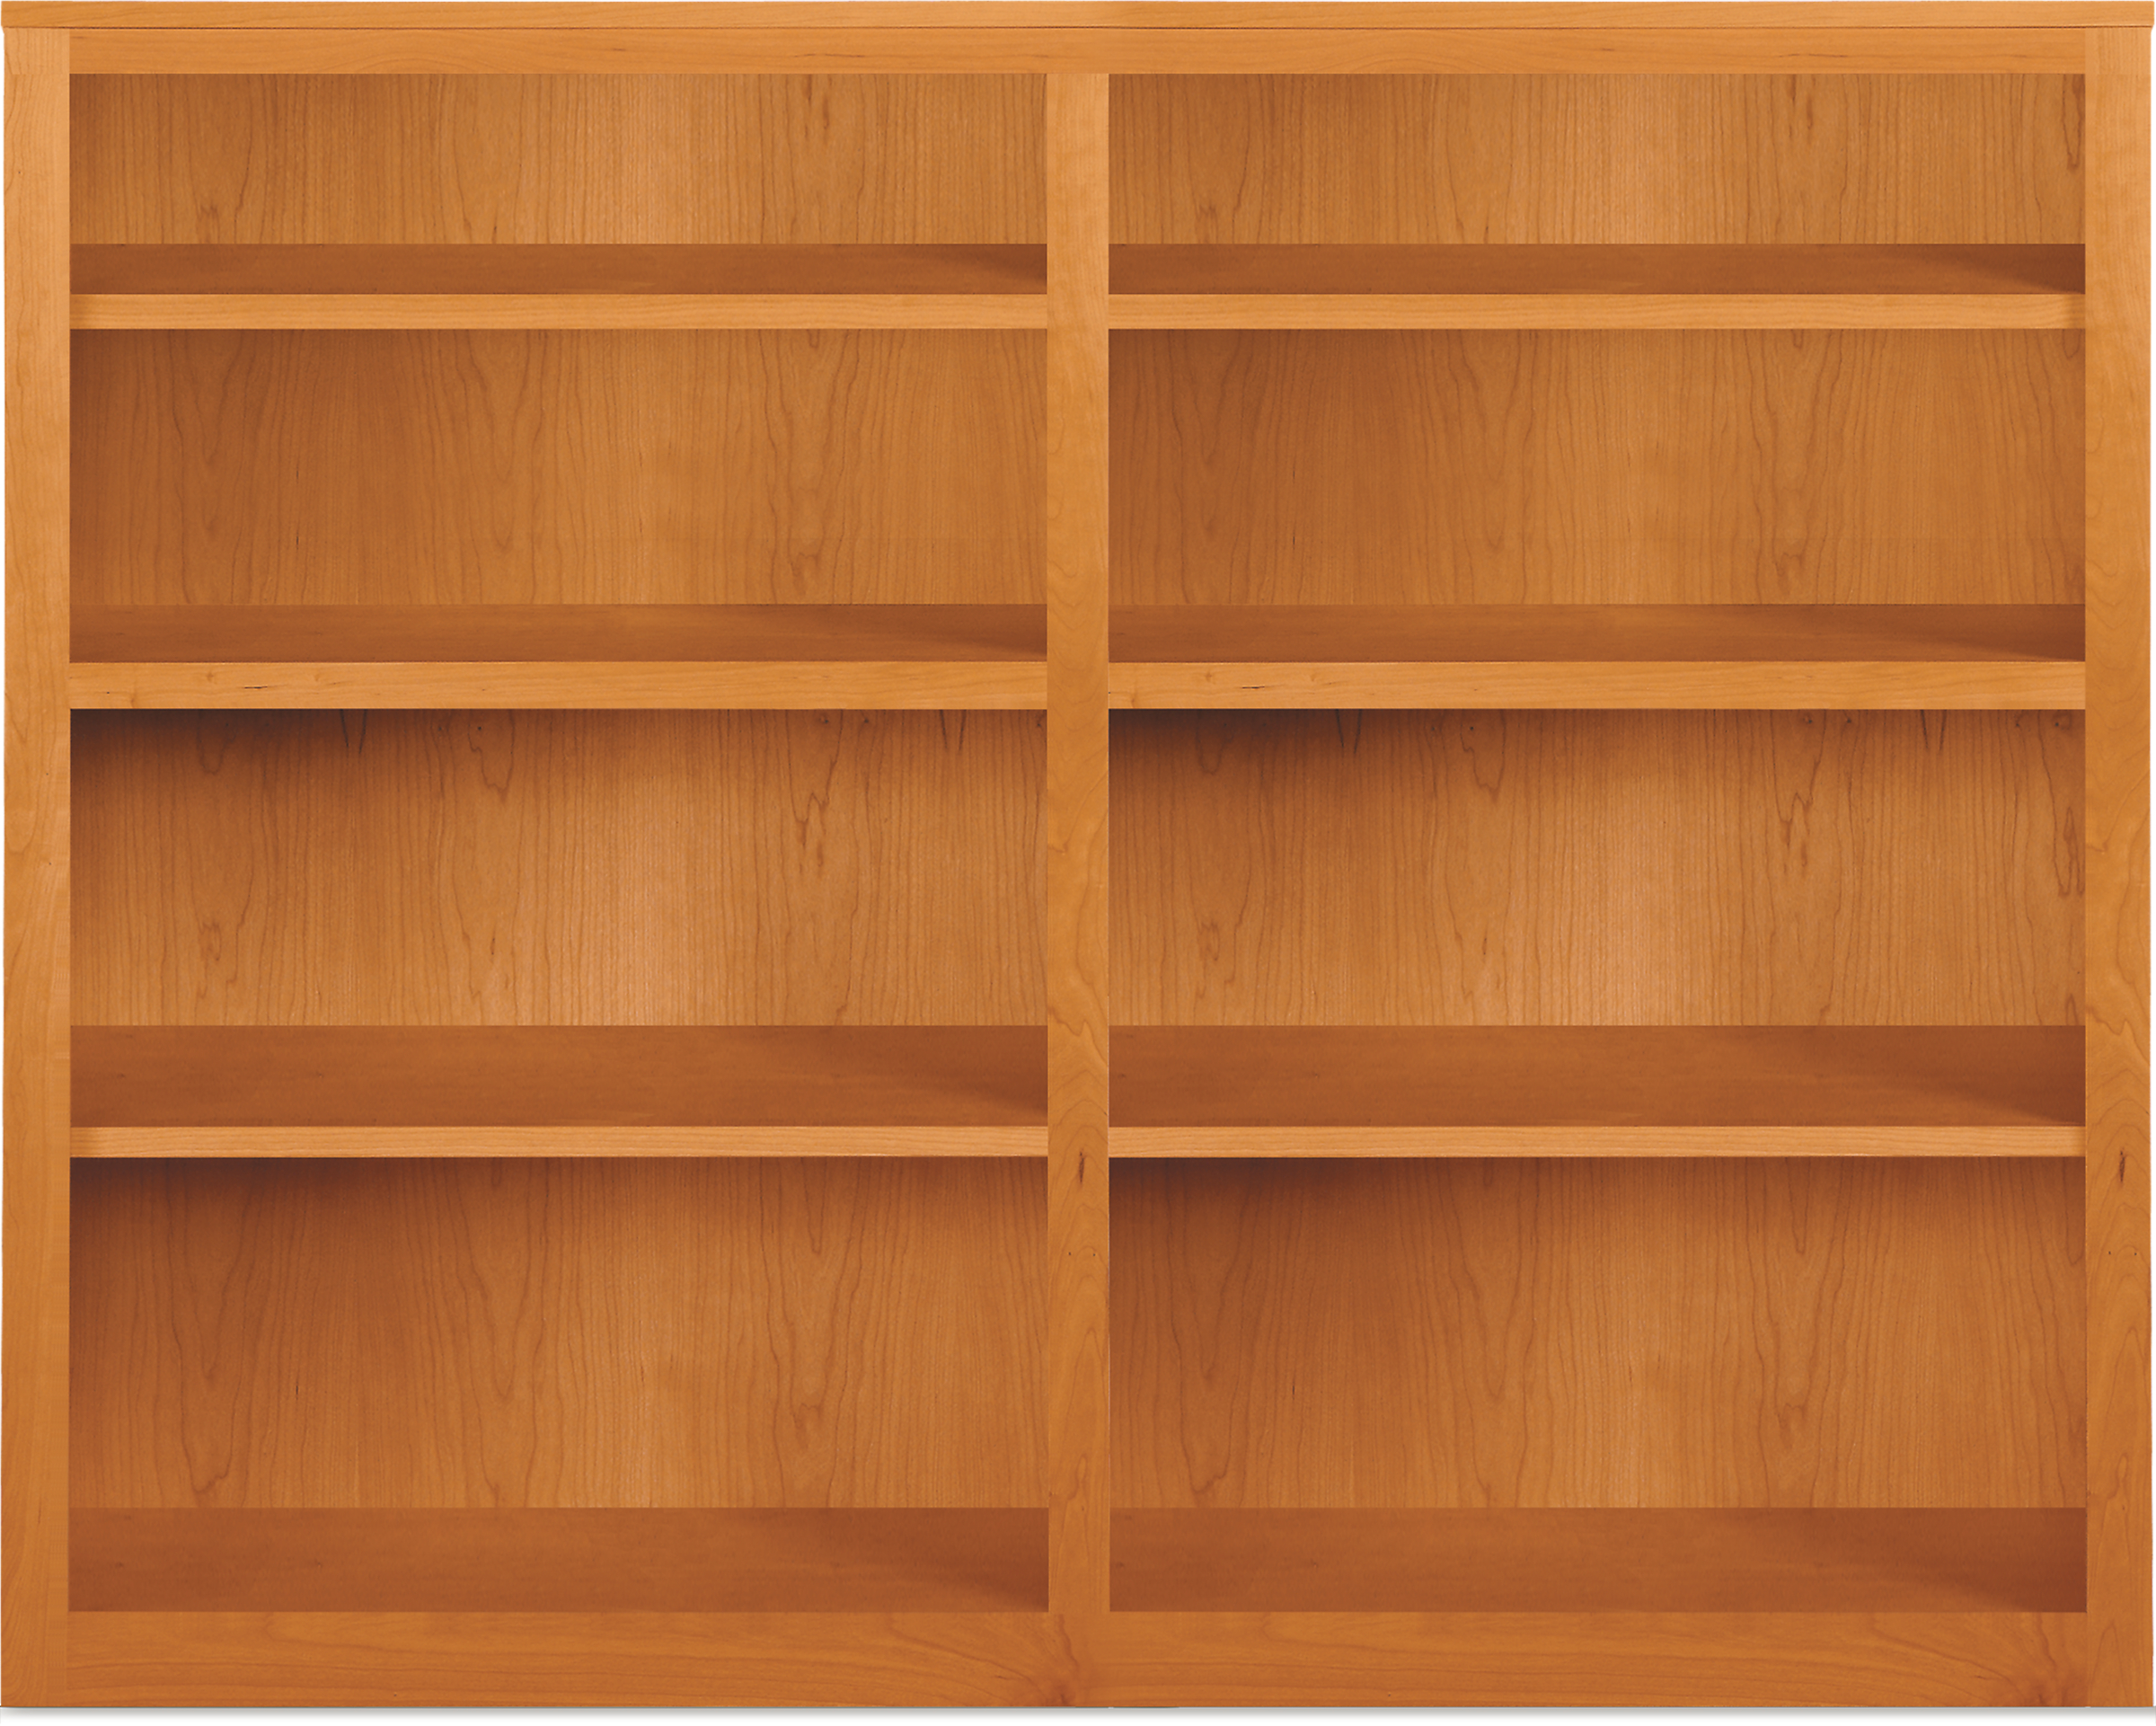 Woodwind 52w 12d 48h Bookcase in Cherry